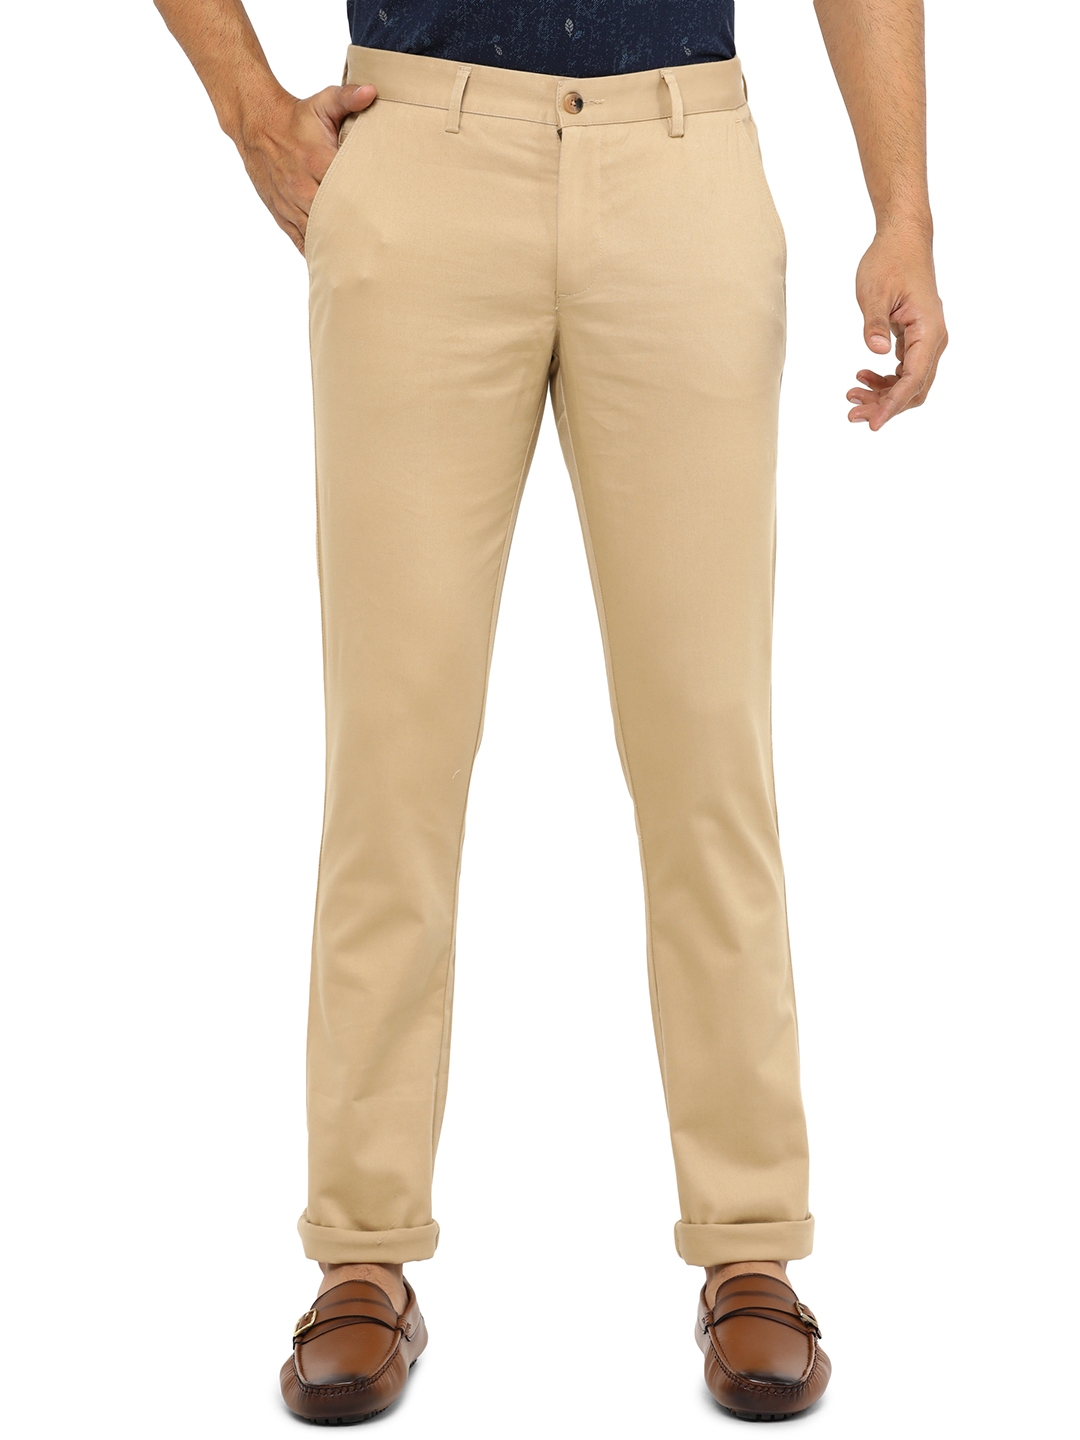 Greenfibre | Beige Solid Super Slim Fit Casual Trouser | Greenfibre